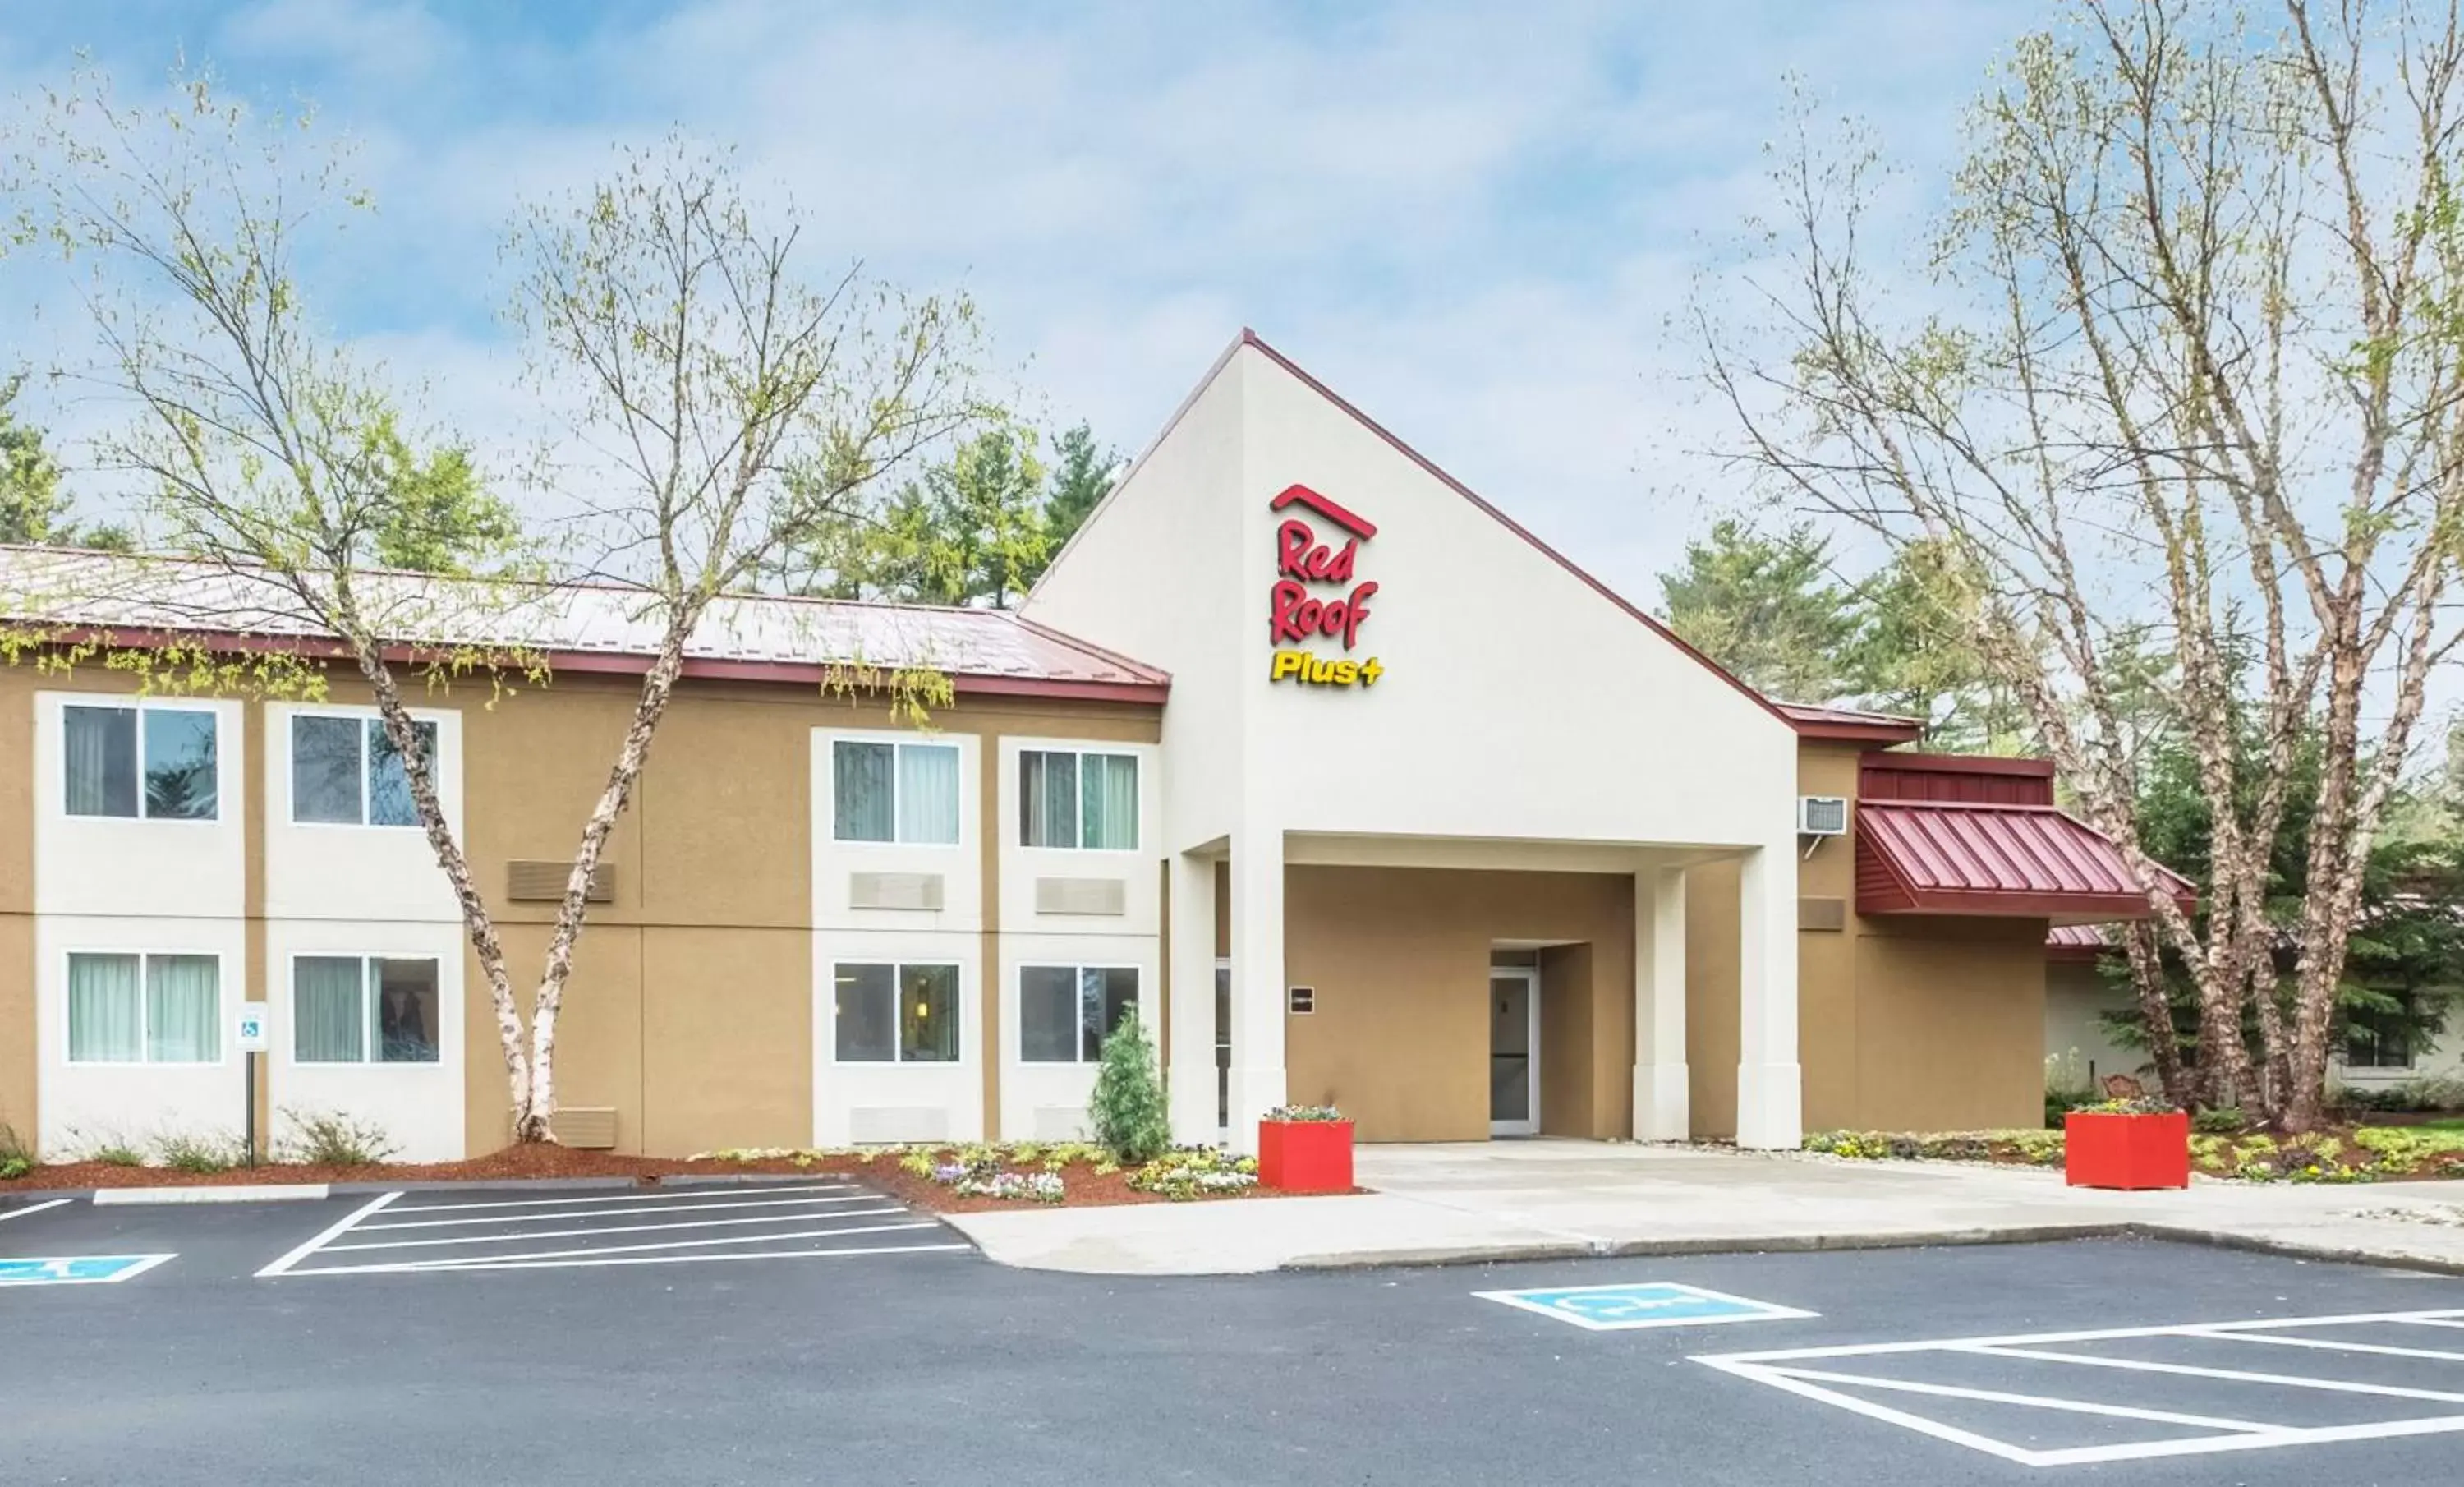 Property Building in Red Roof Inn PLUS+ South Deerfield - Amherst